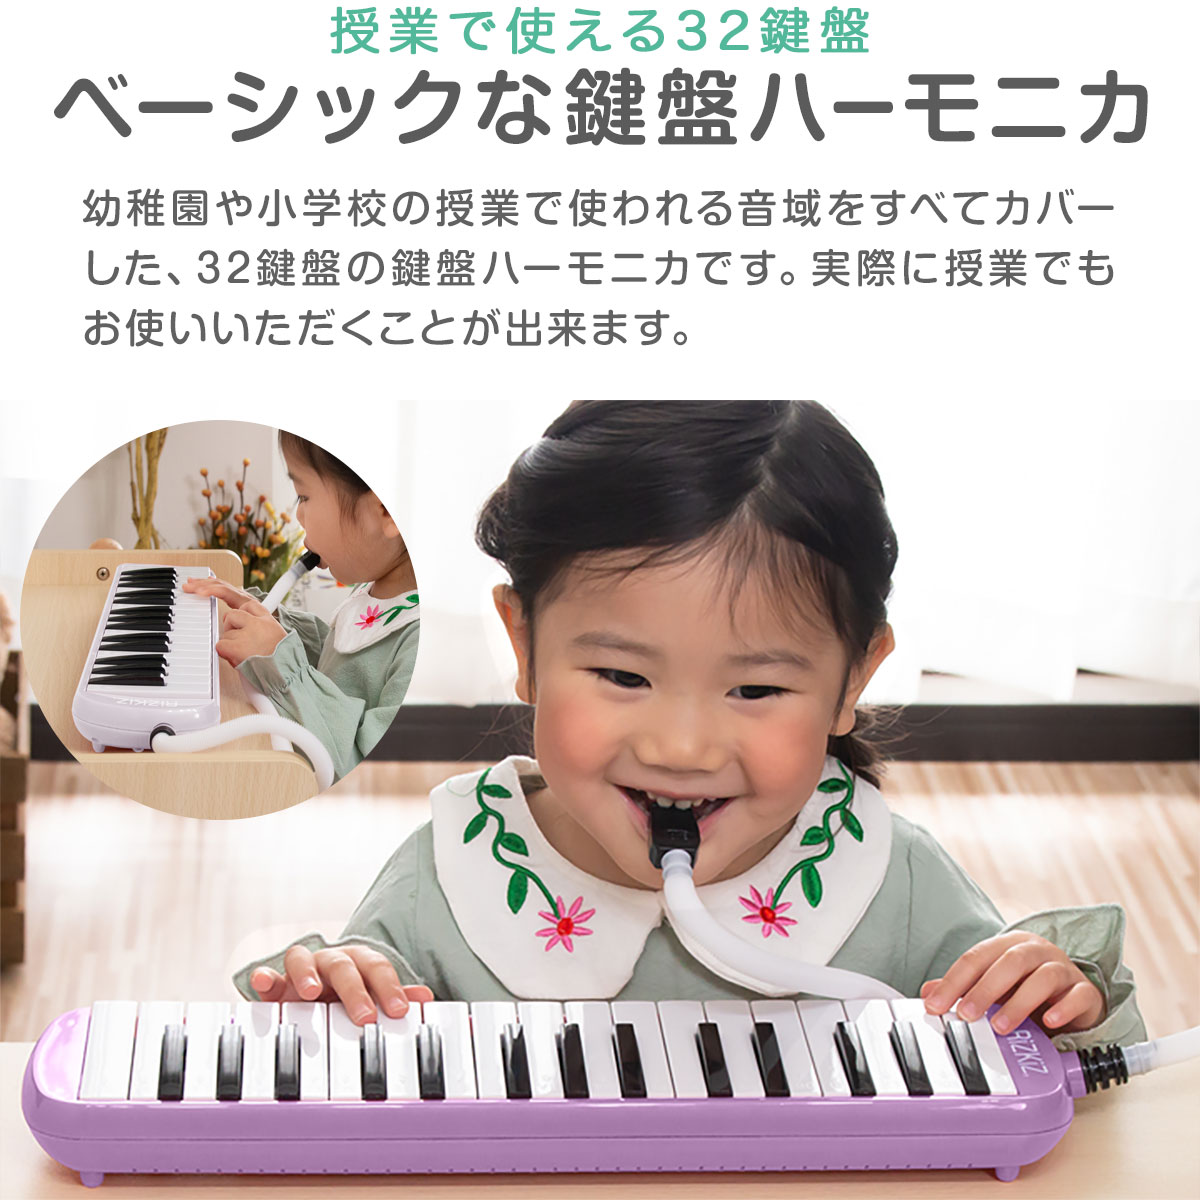 1 year guarantee melodica 32 keyboard case attaching table ... present elementary school kindergarten keyboard instruments music blow .. hose present present toy recommendation free shipping 